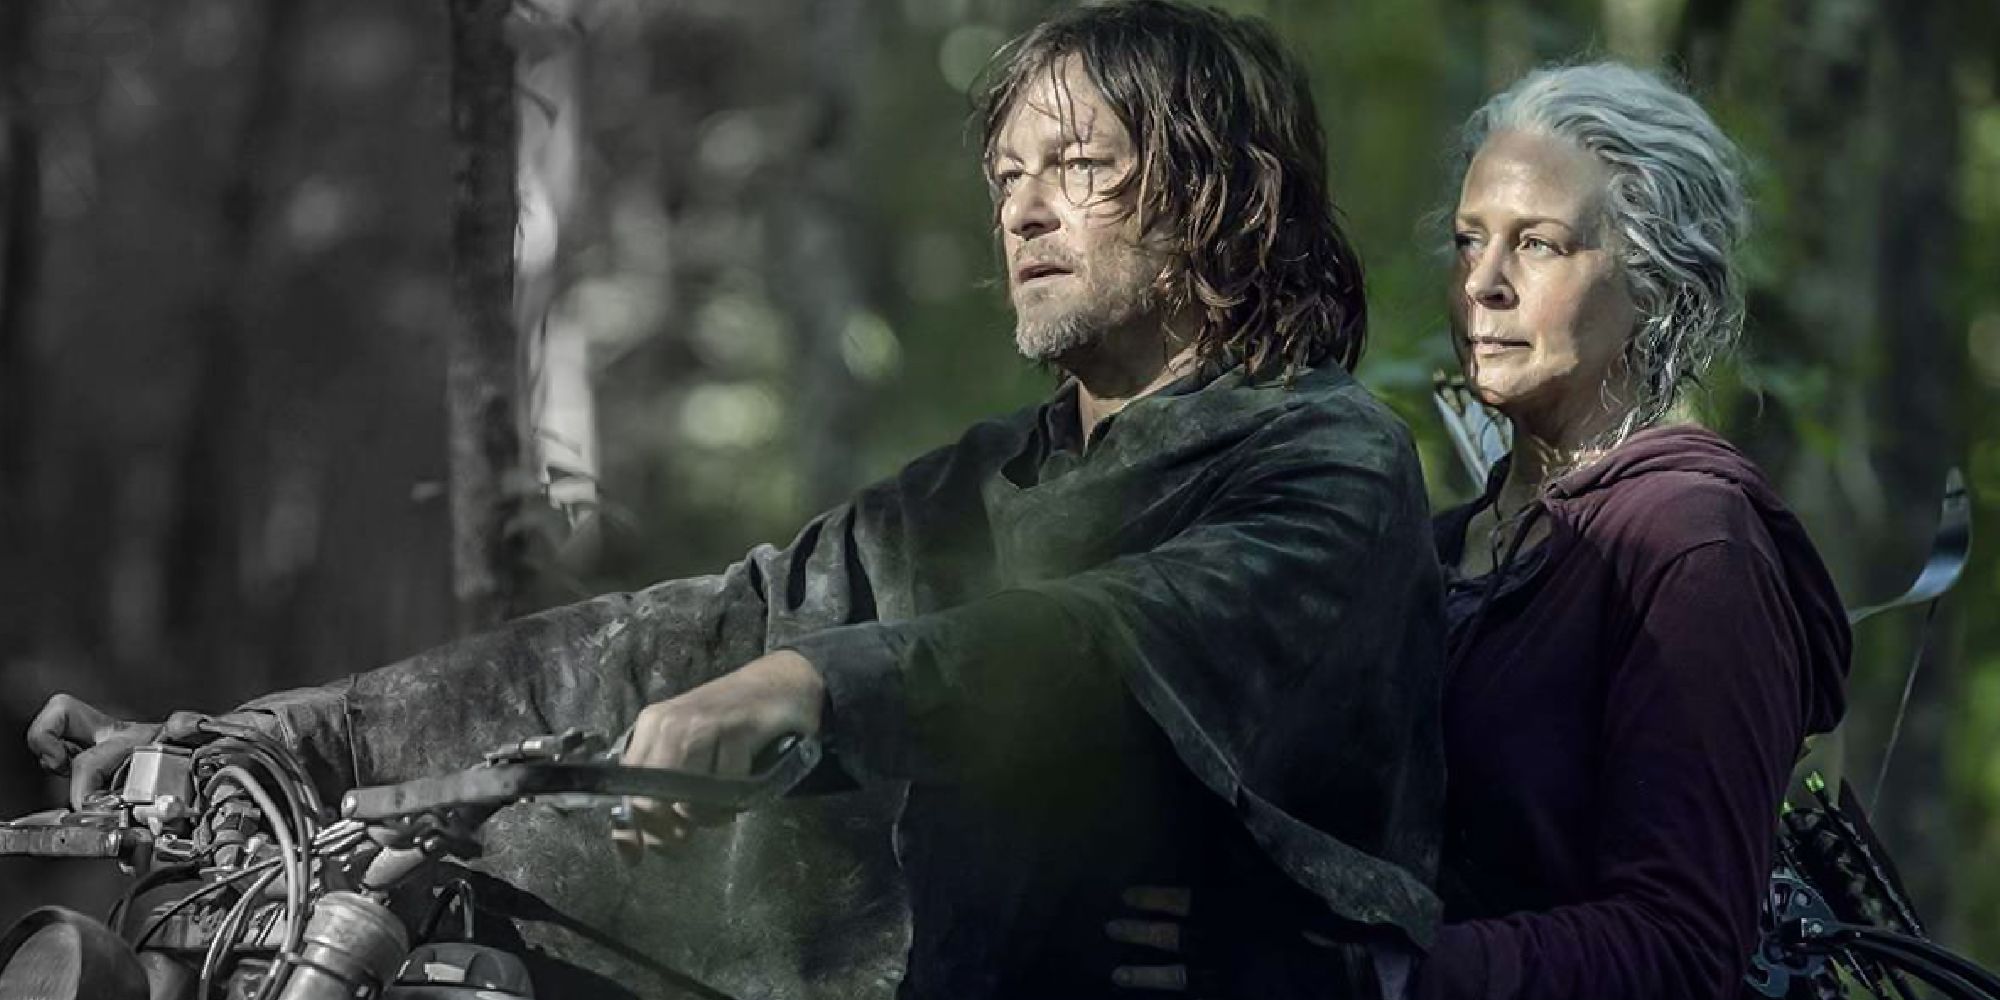 Daryl and Carol riding his bike in The Walking Dead